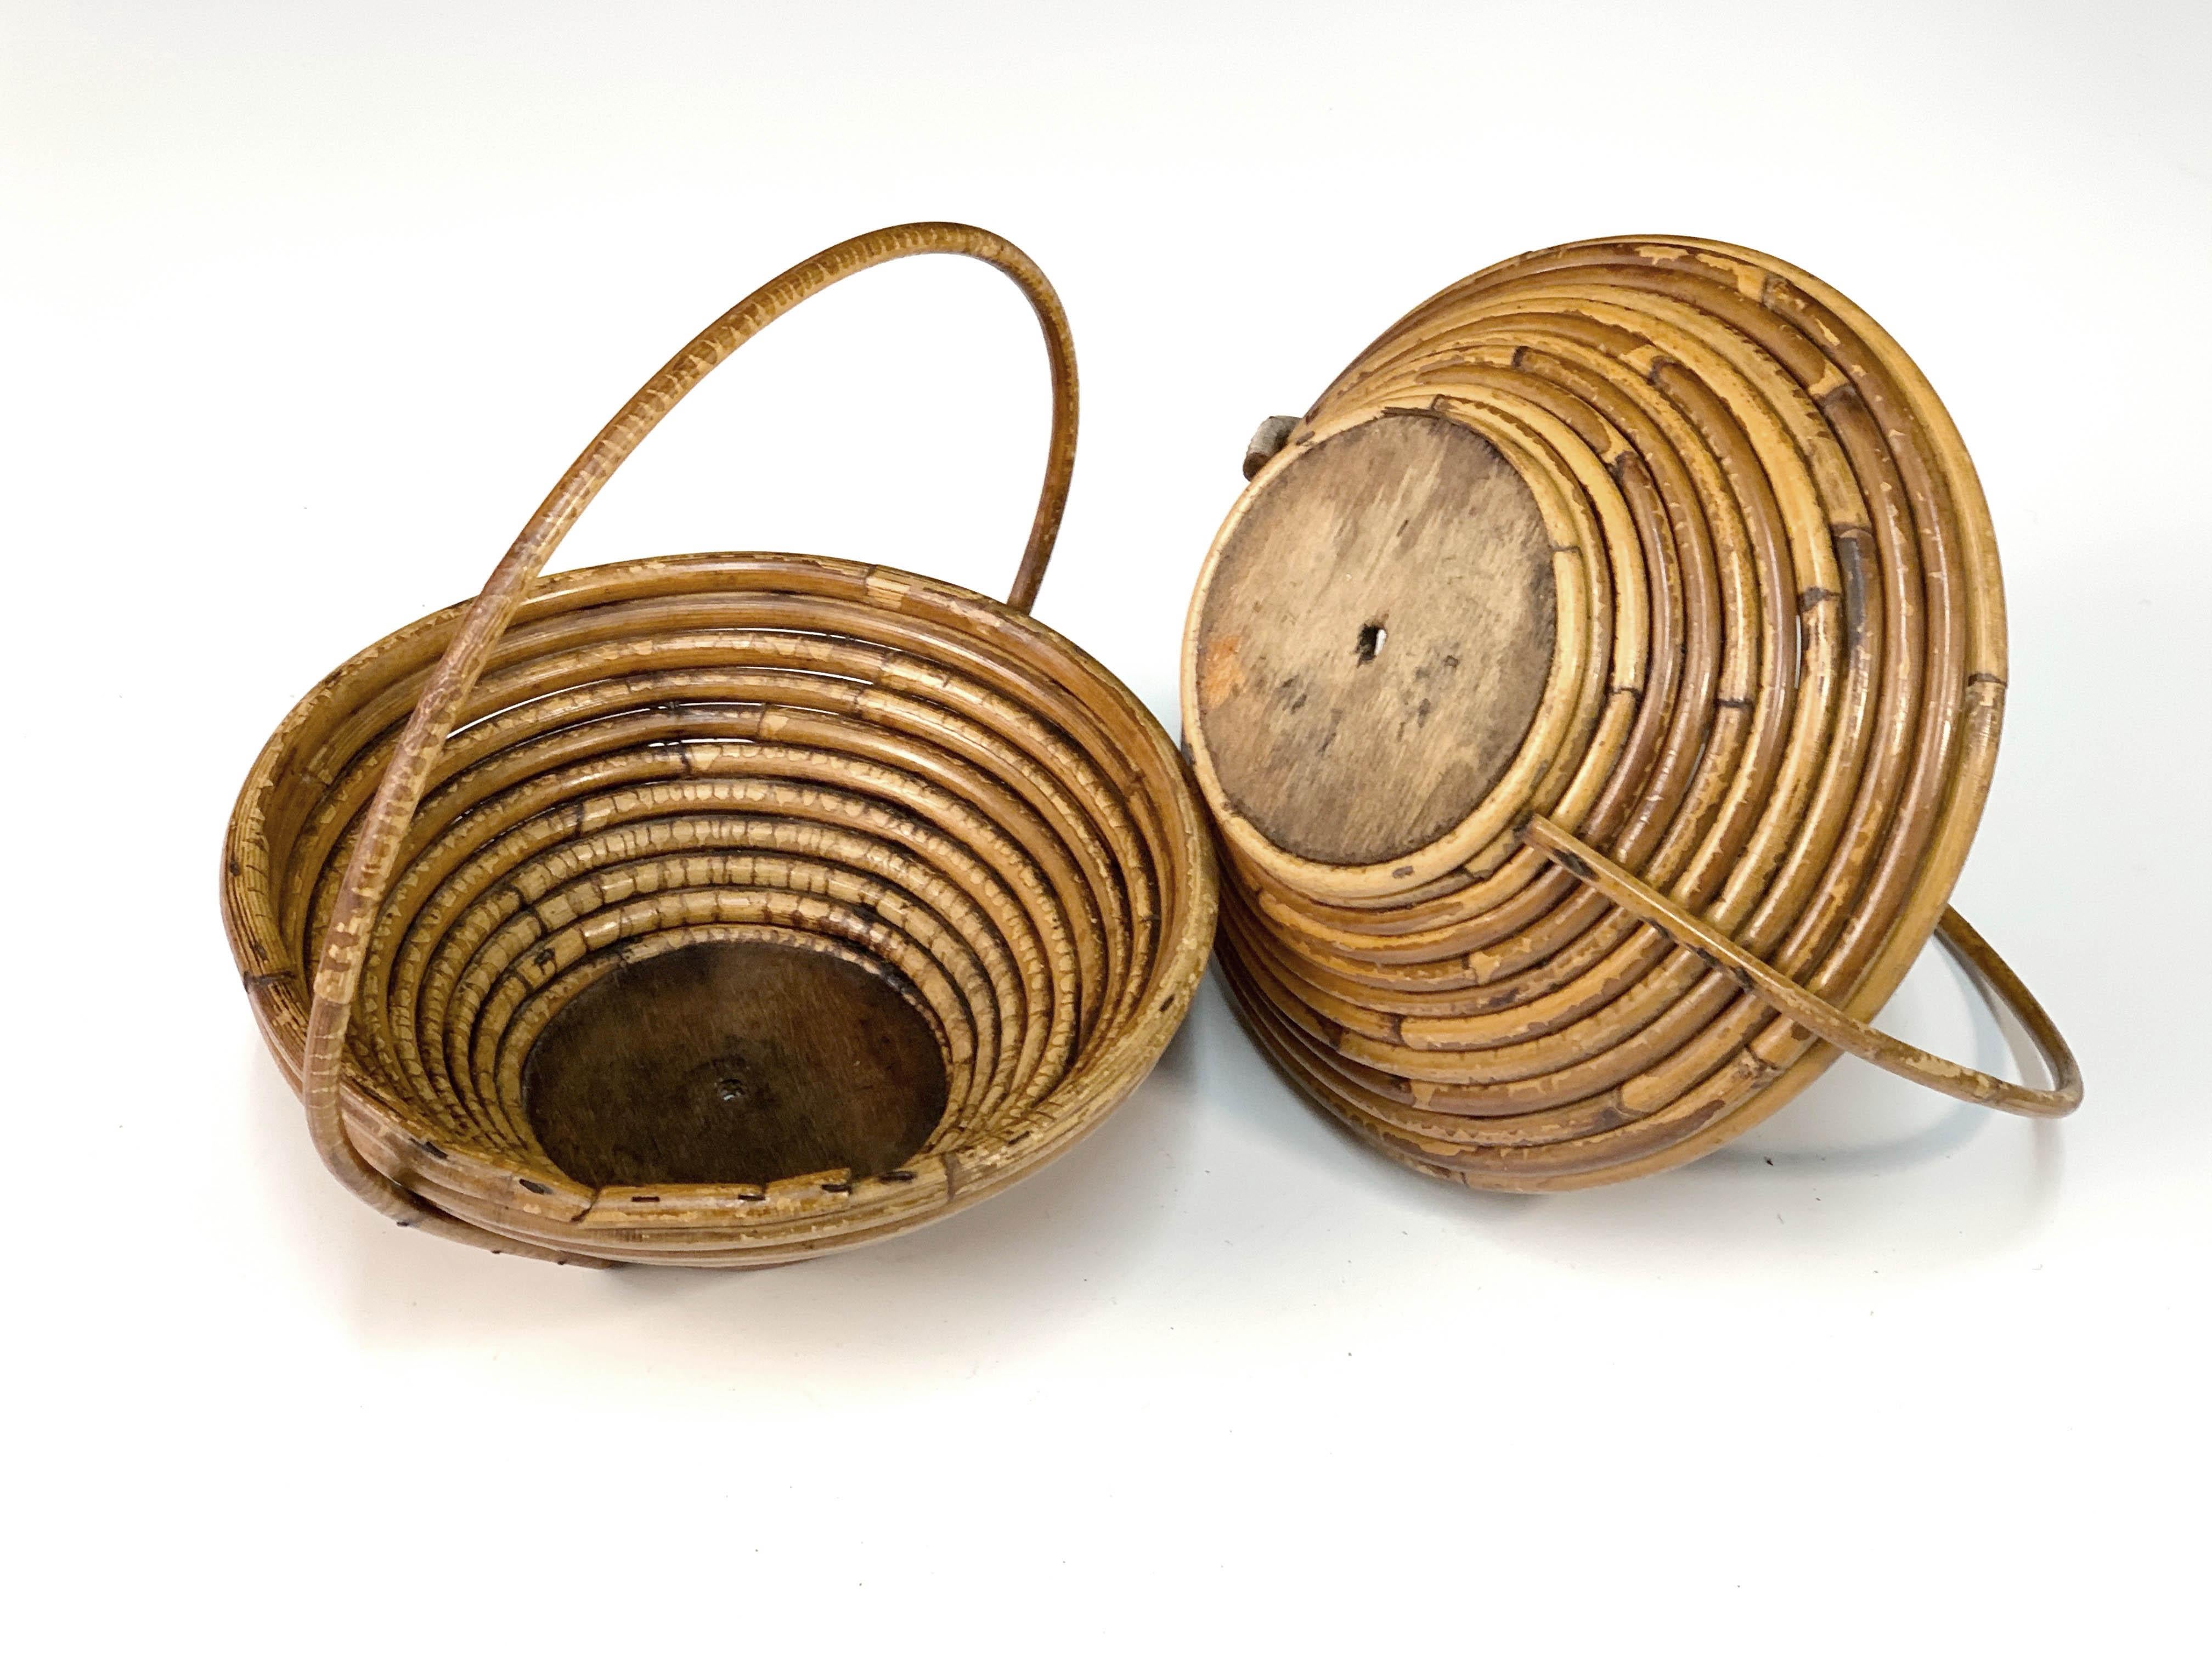 Pair of Bamboo and Rattan Midcentury Bowls, 1970s For Sale 5